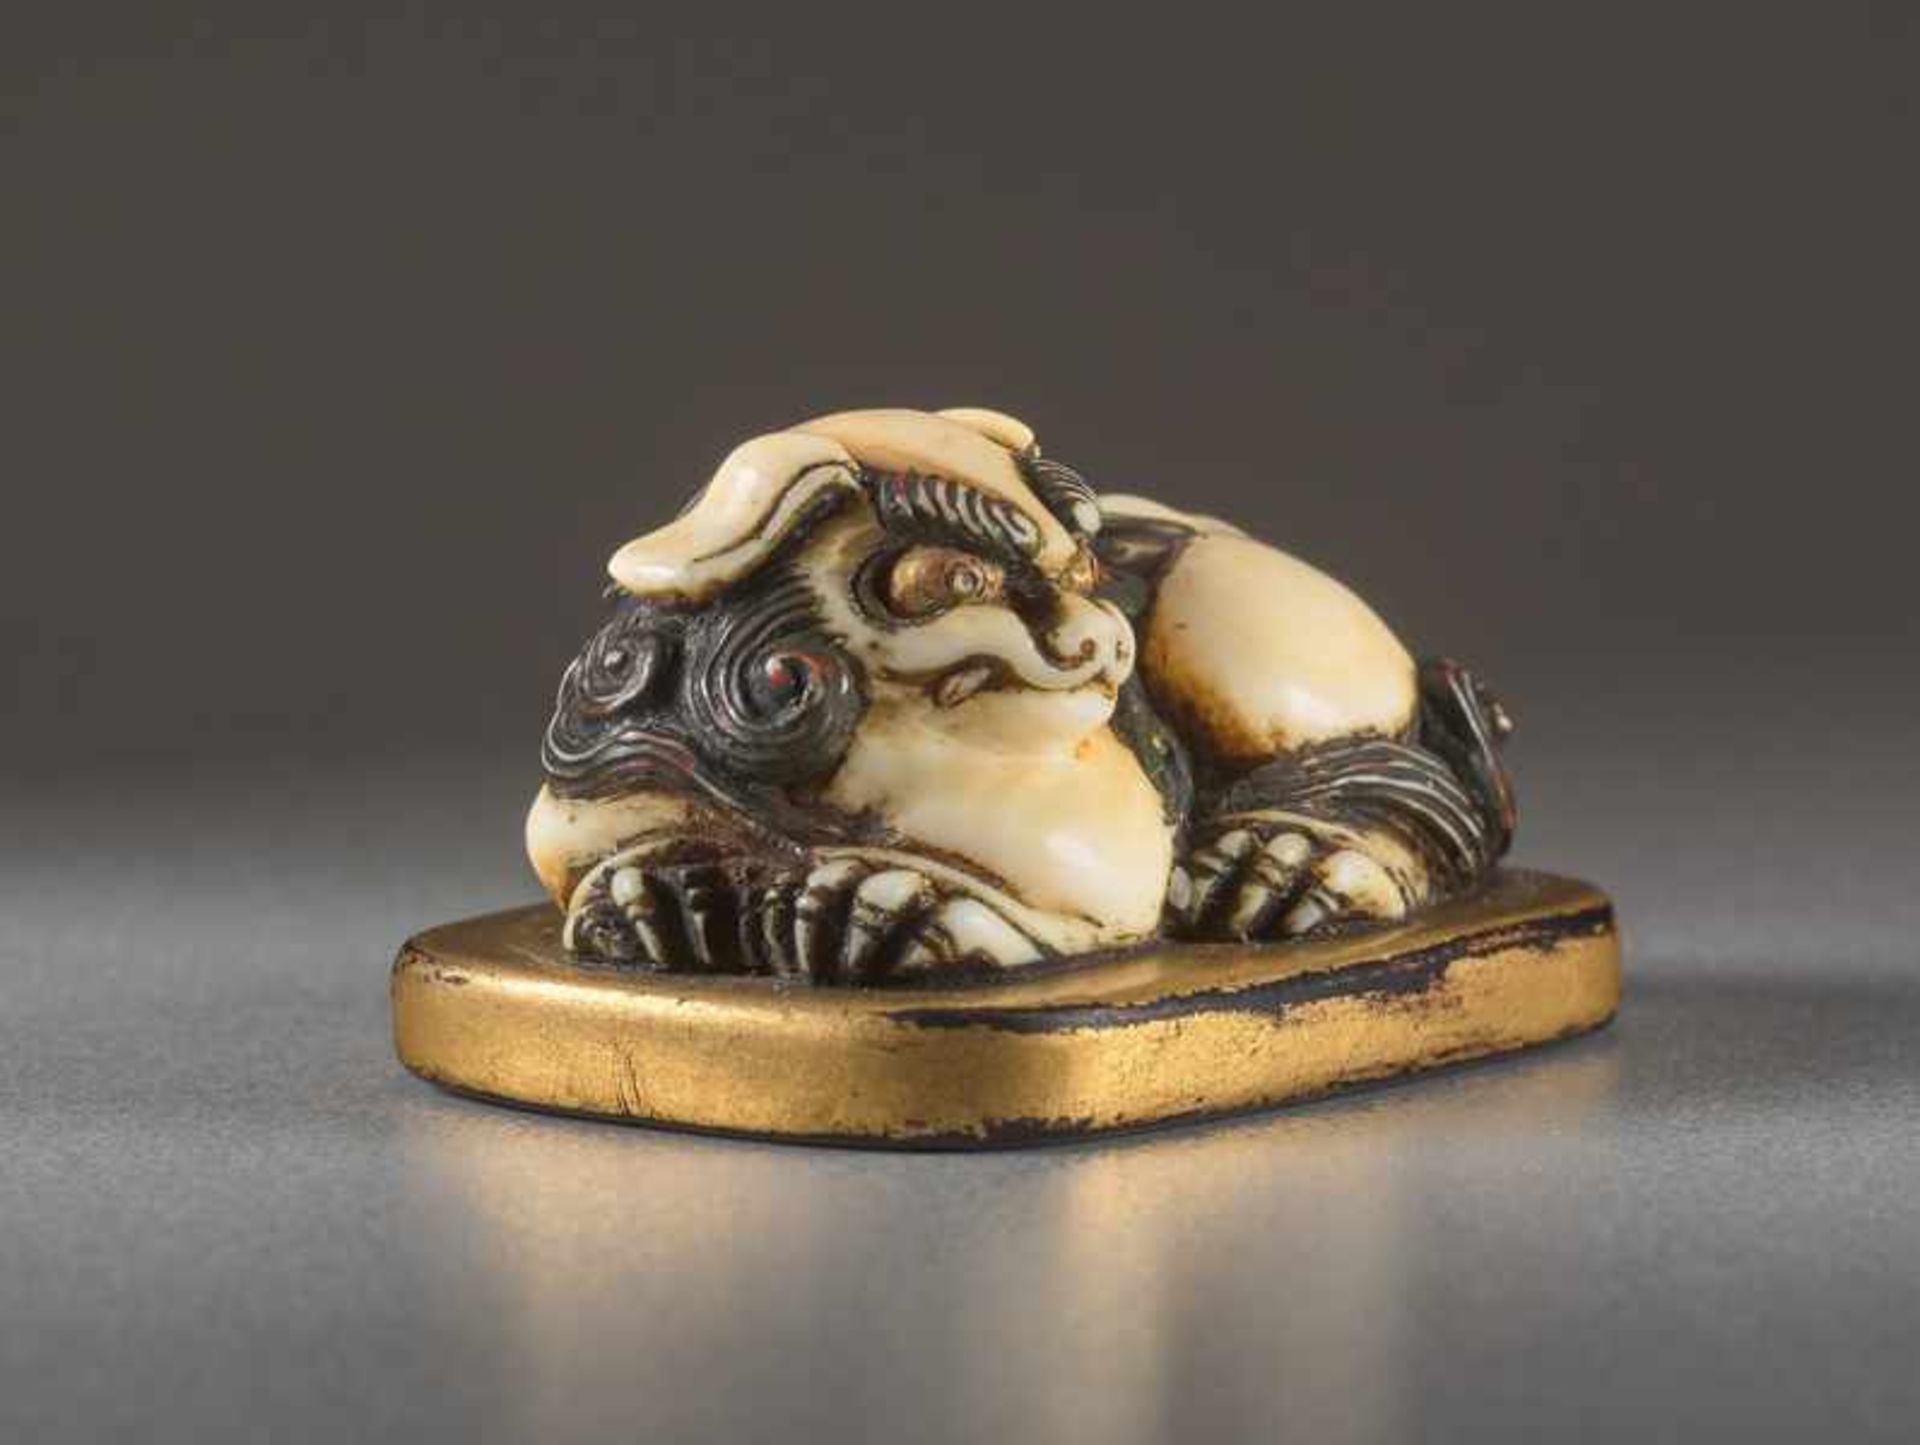 AN IVORY AND LACQUER NETSUKE OF A RECUMBENT SHISHI ON MAT Ivory netsuke with gold lacquer. Japan, - Image 4 of 5